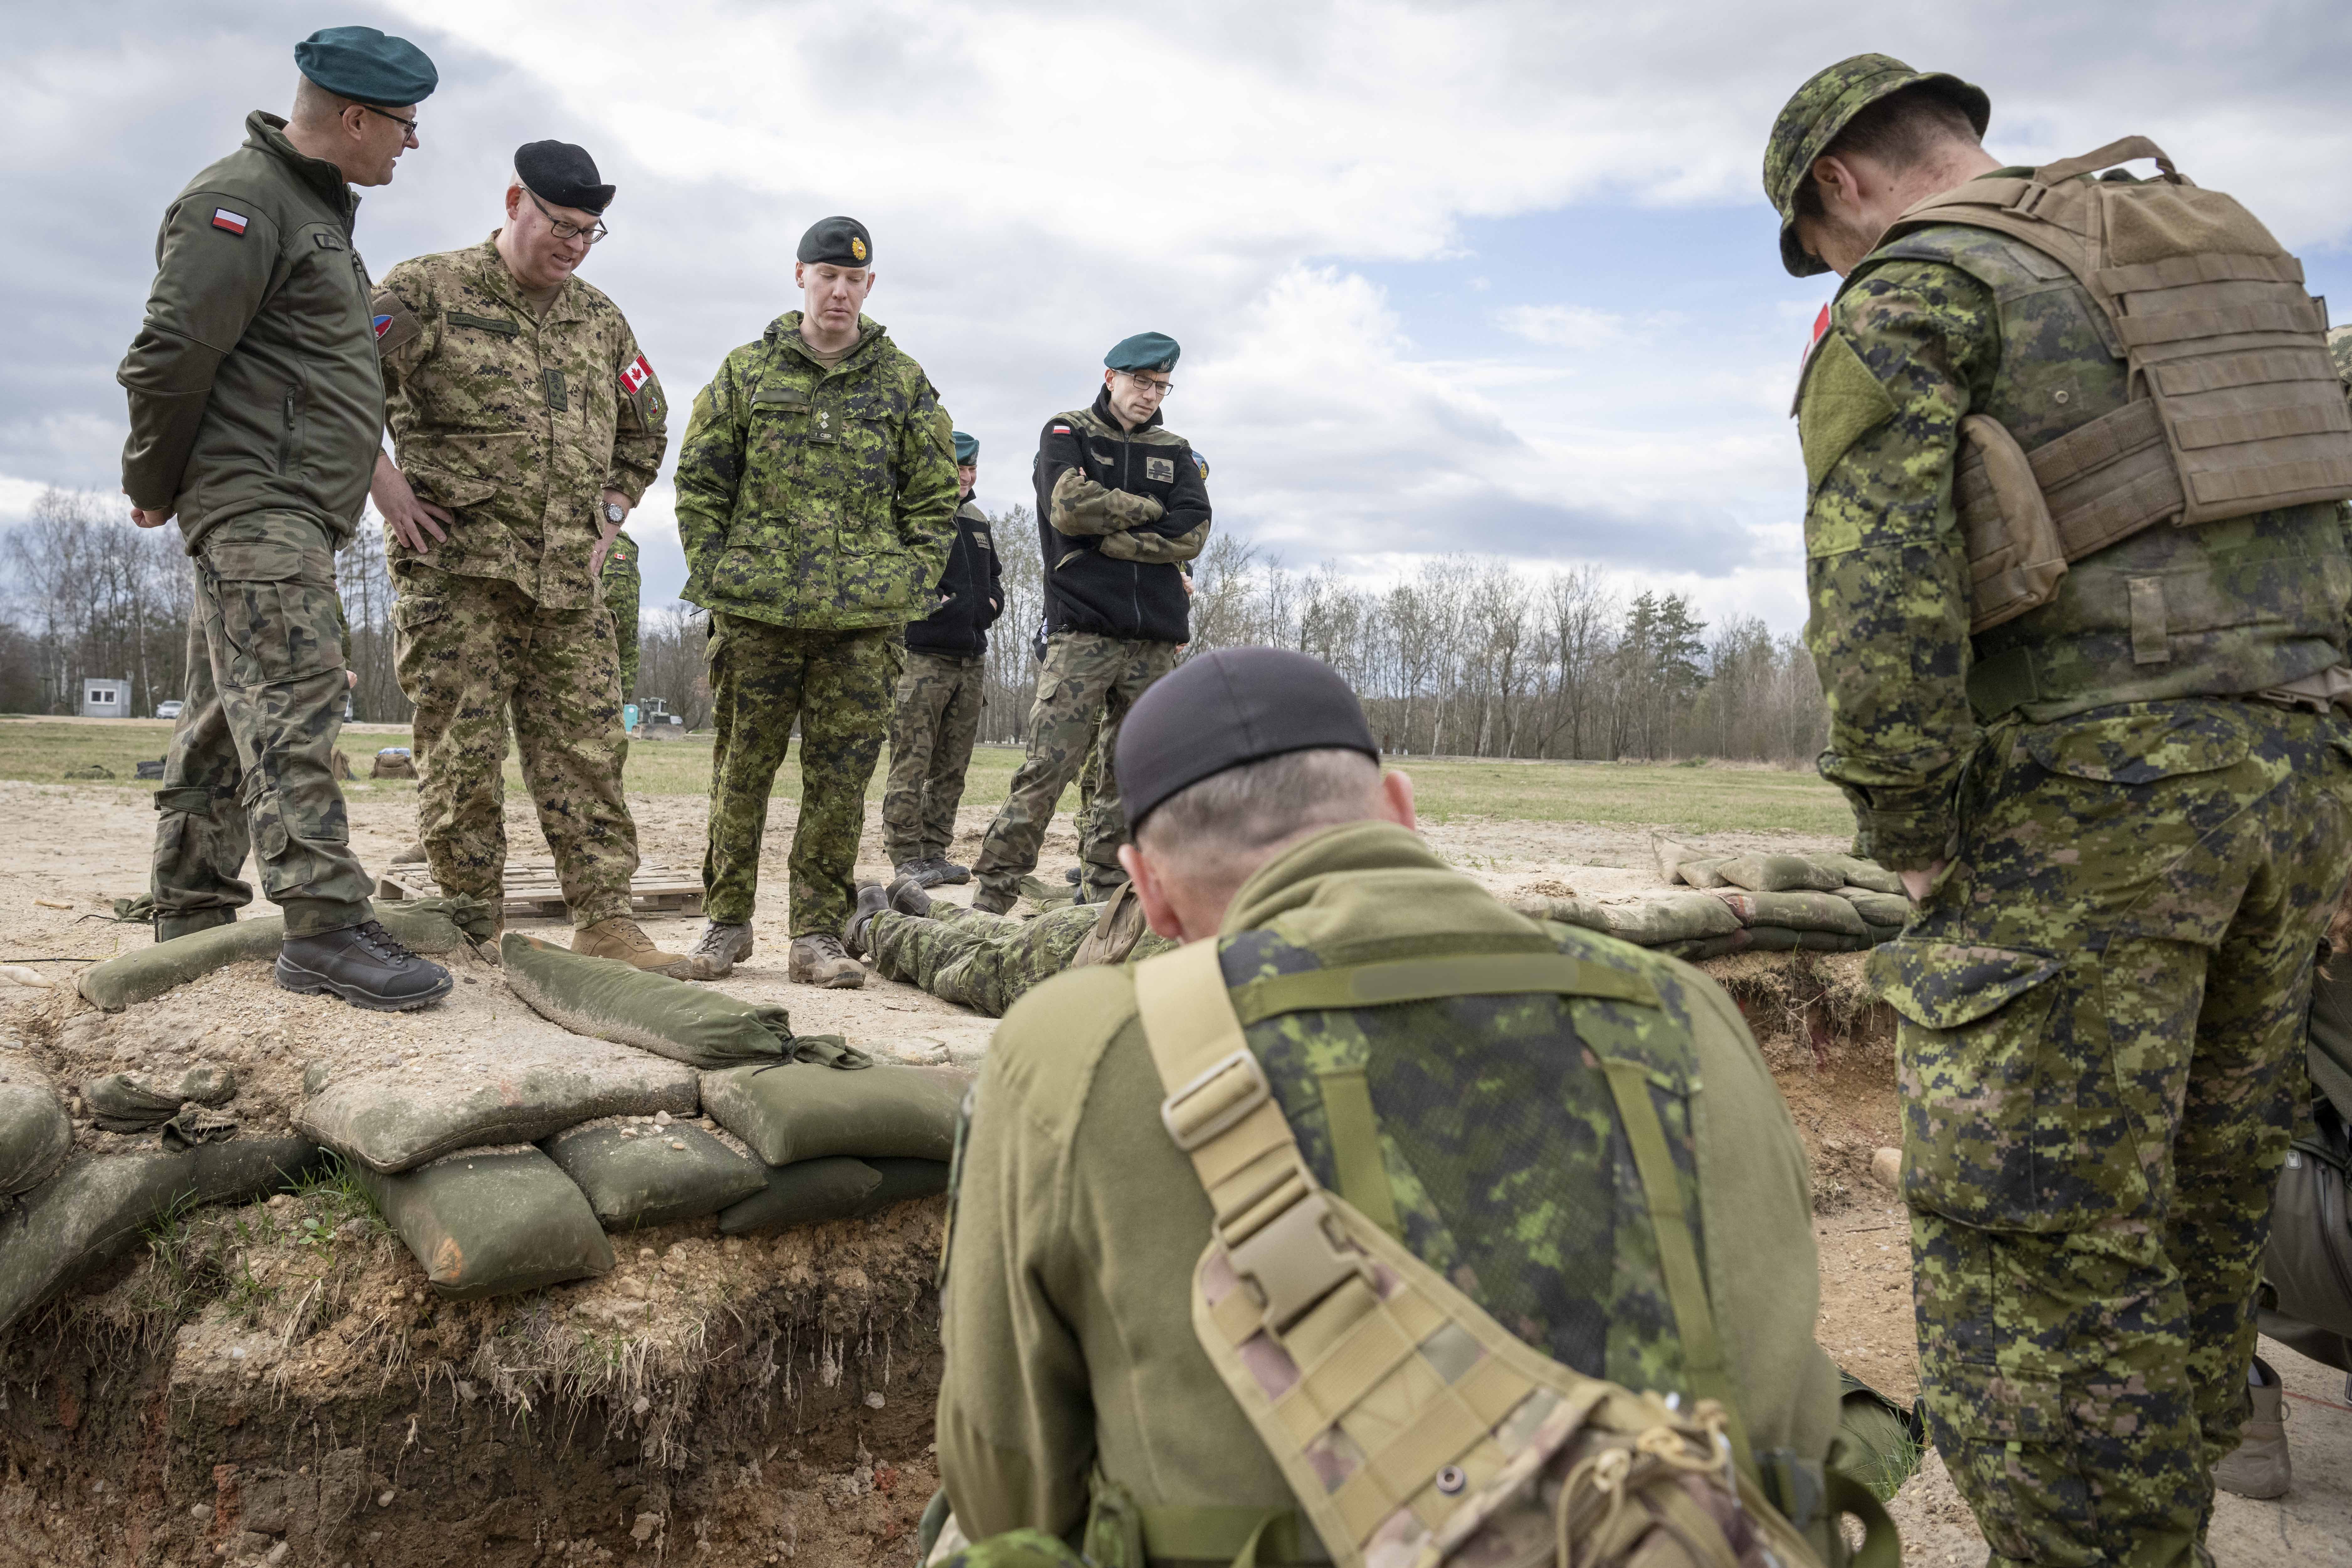 : VAdm Auchterlonie tours the Engineer Training Element training area where CAF soldiers instruct Ukrainian  and Polish Armed Forces soldiers in south-western Poland during Op UNIFIER on March 25, 2023 Credit: Corporal Marco Tijam